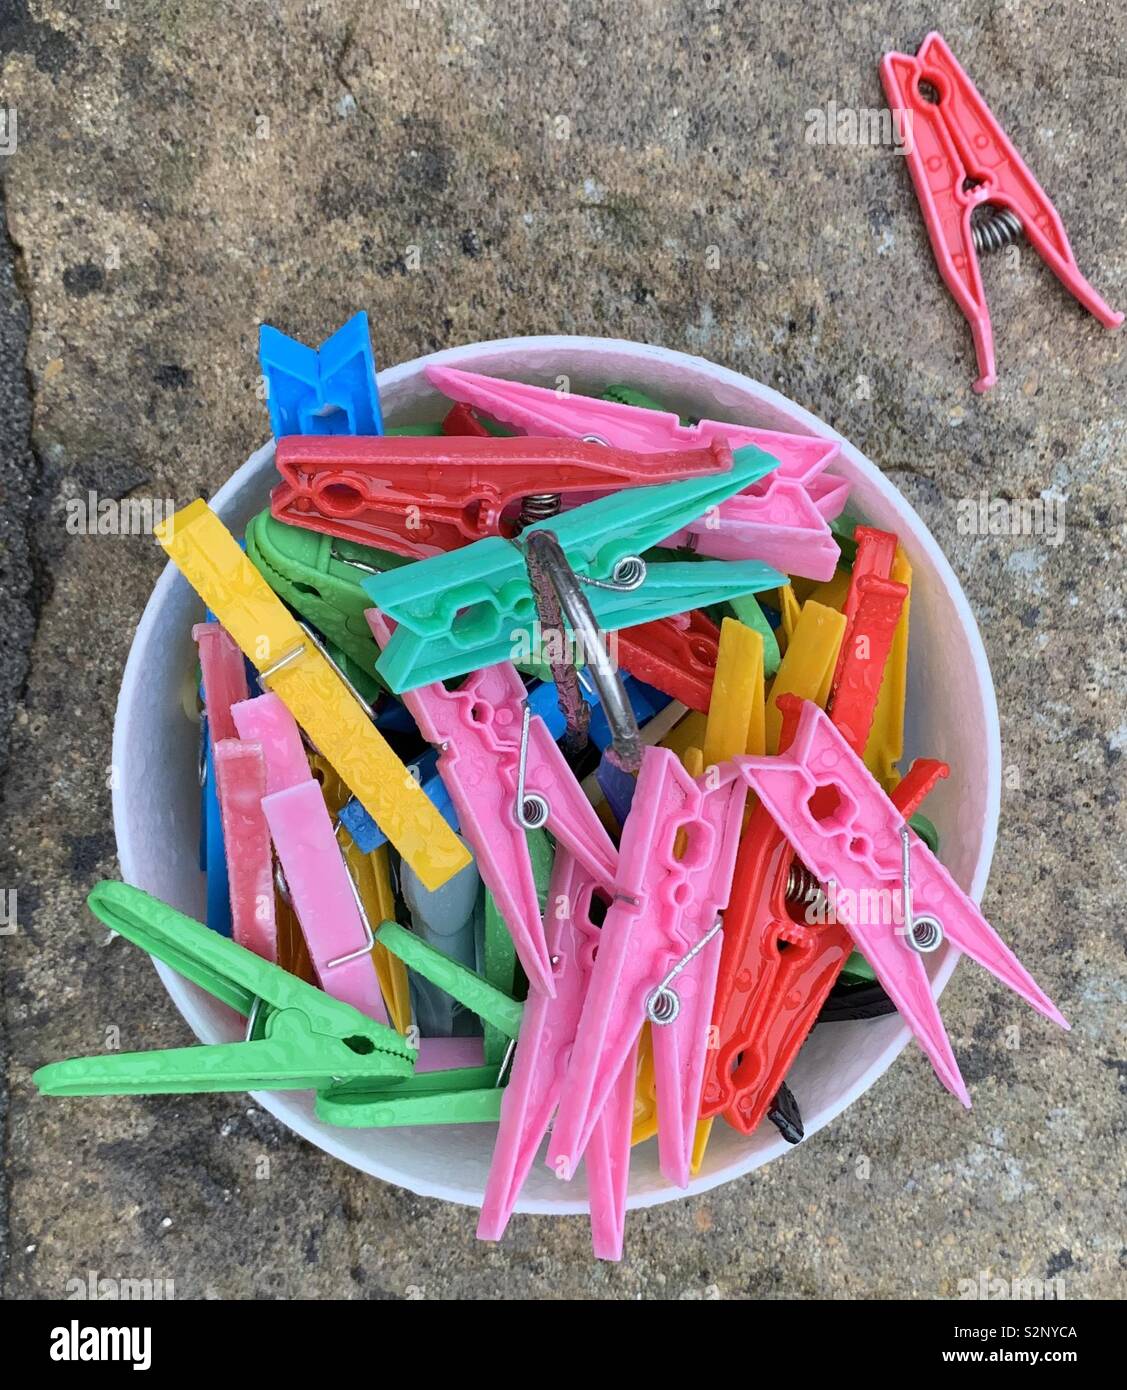 Colourful plastic clothes pegs on paving slab Stock Photo